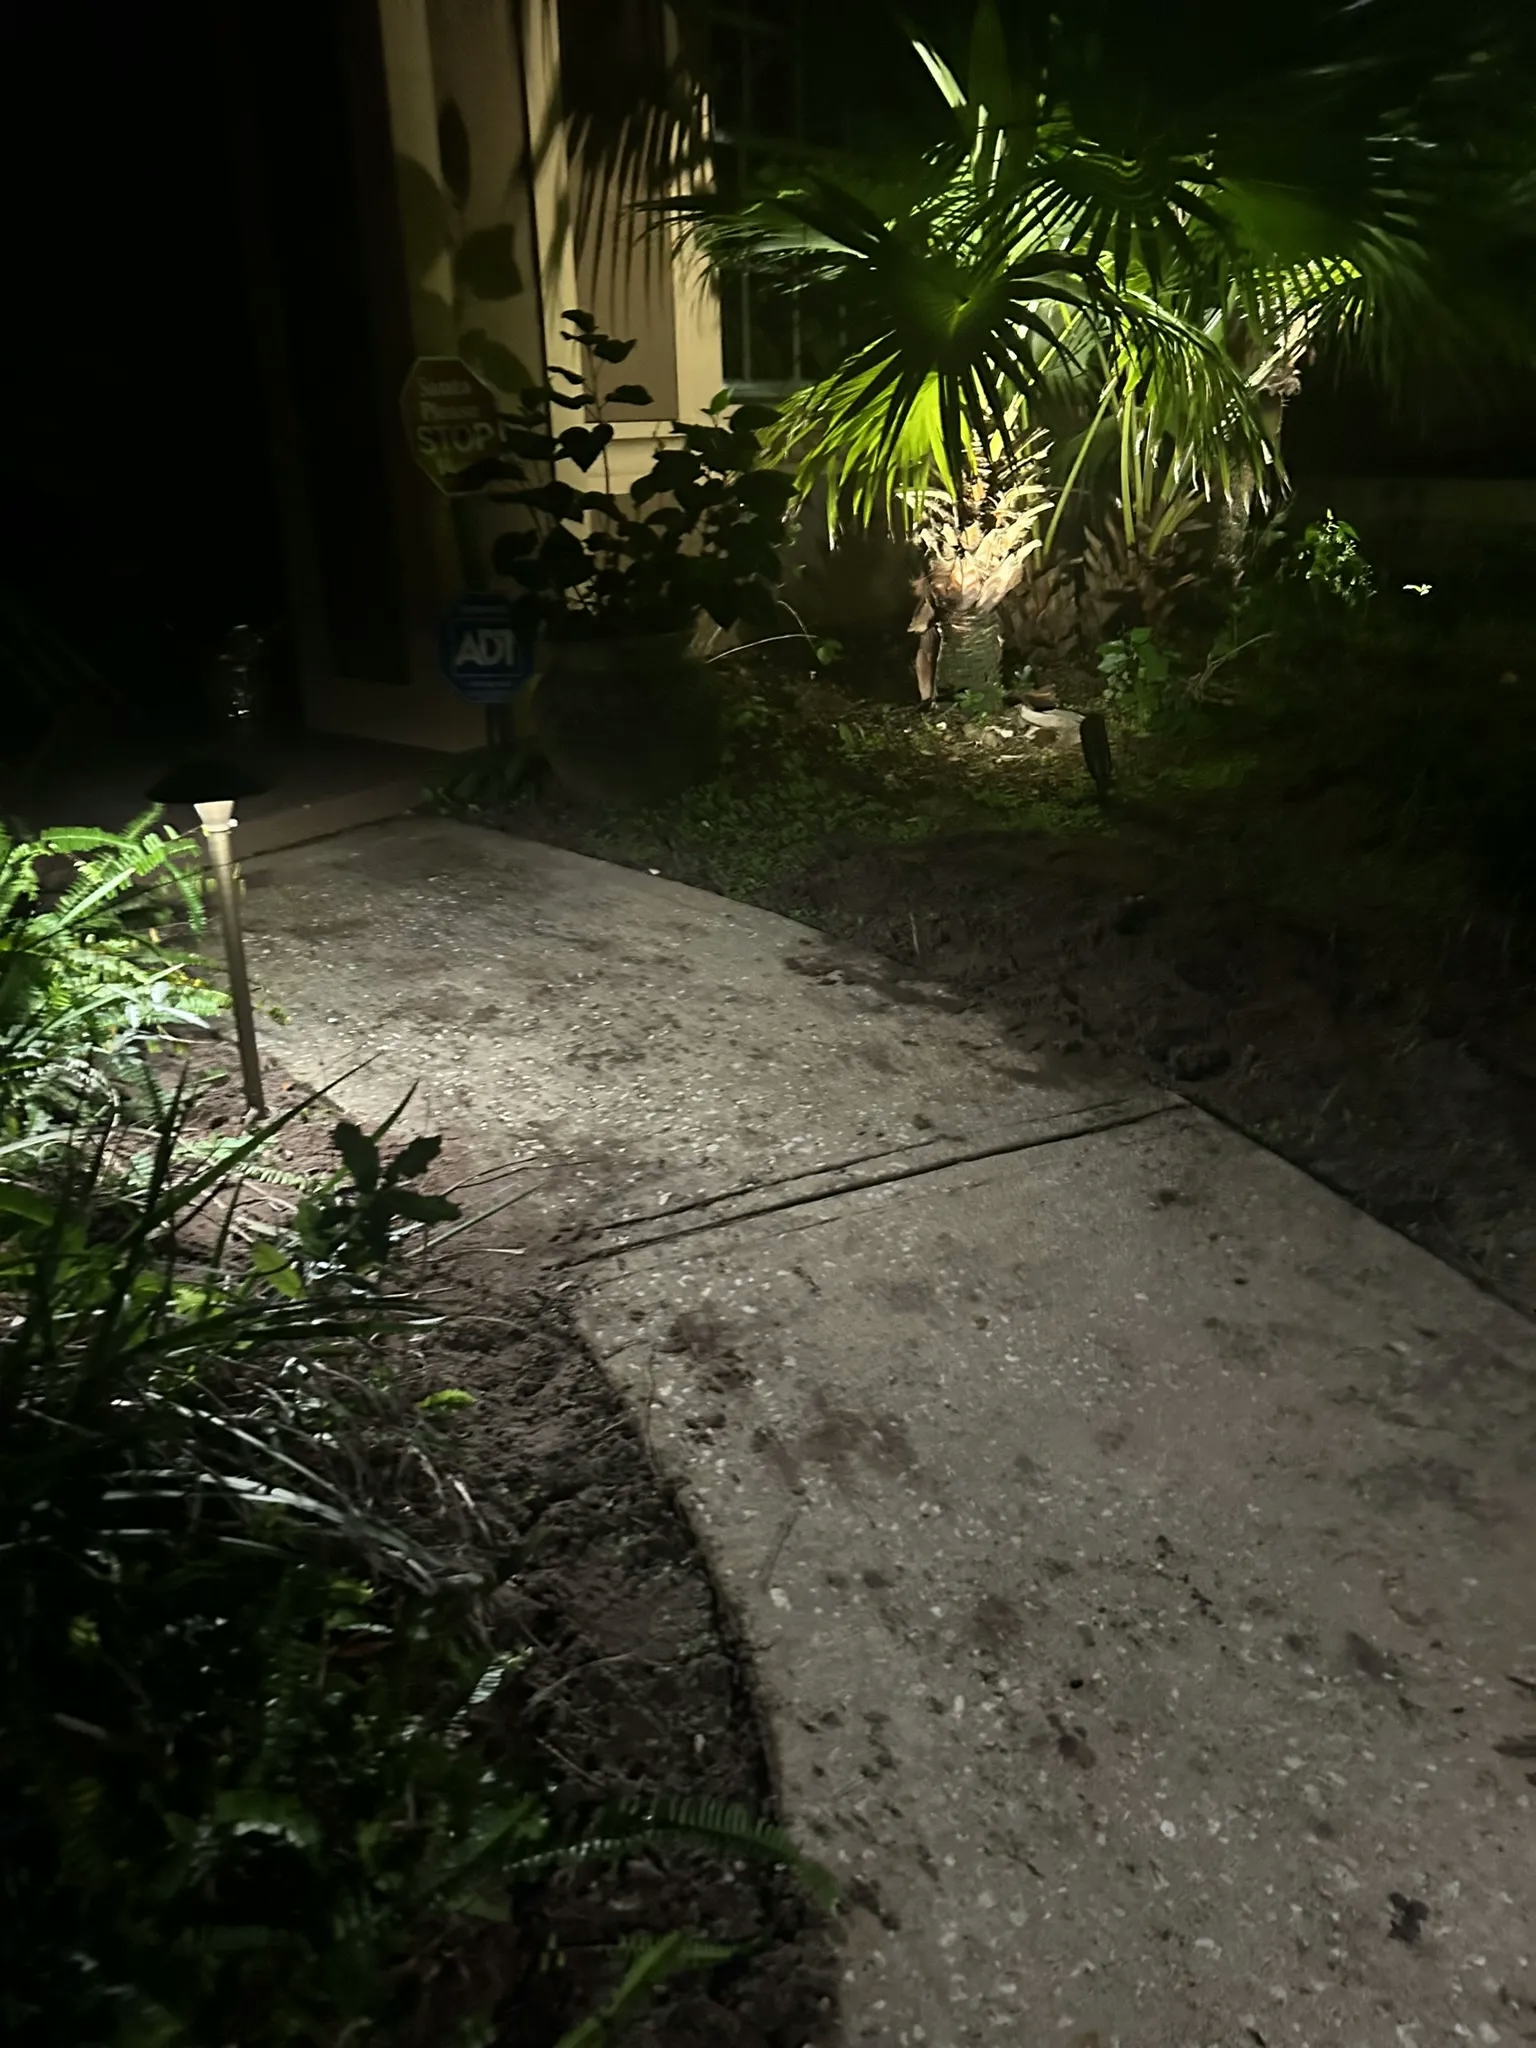 Strategically placed lights illuminate a lush lawn and garden elements at night, creating a serene outdoor atmosphere.